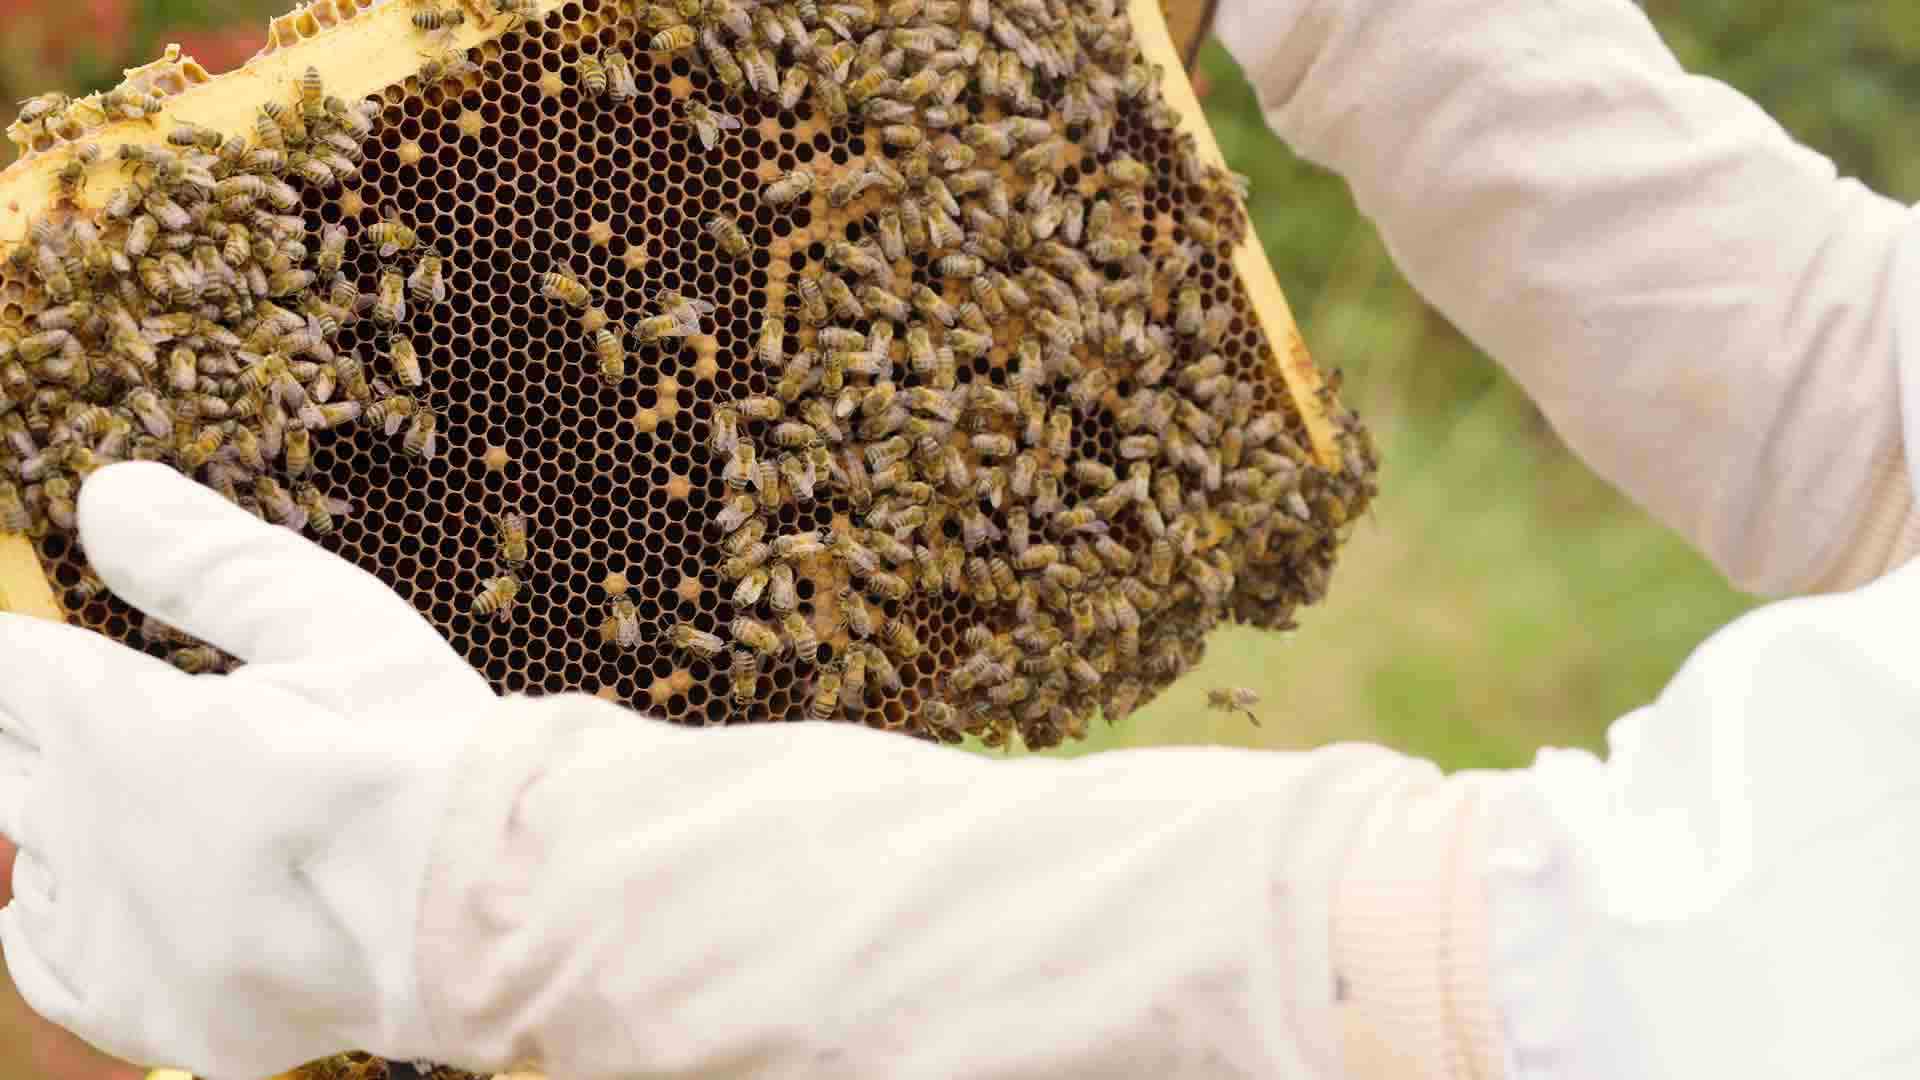 Beehive landing board covered in bees